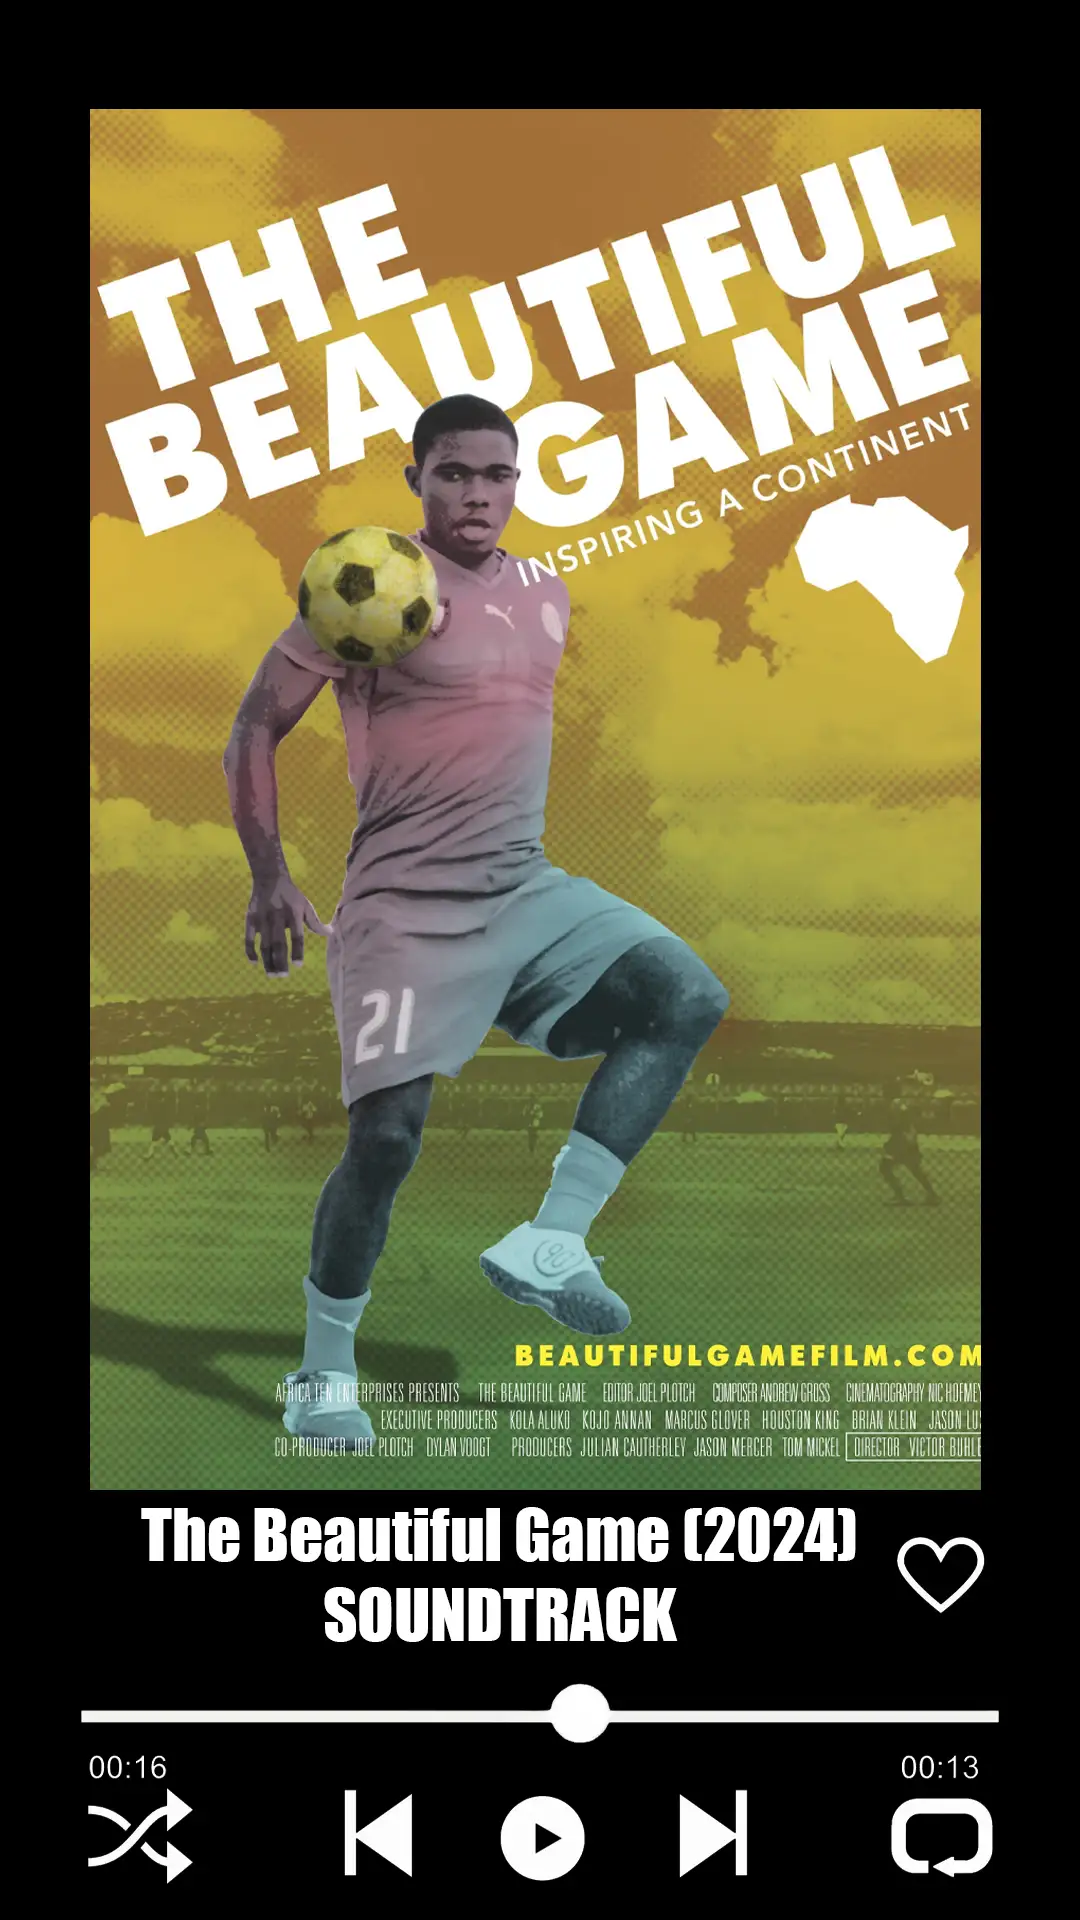 The Beautiful Game Soundtrack (2024)